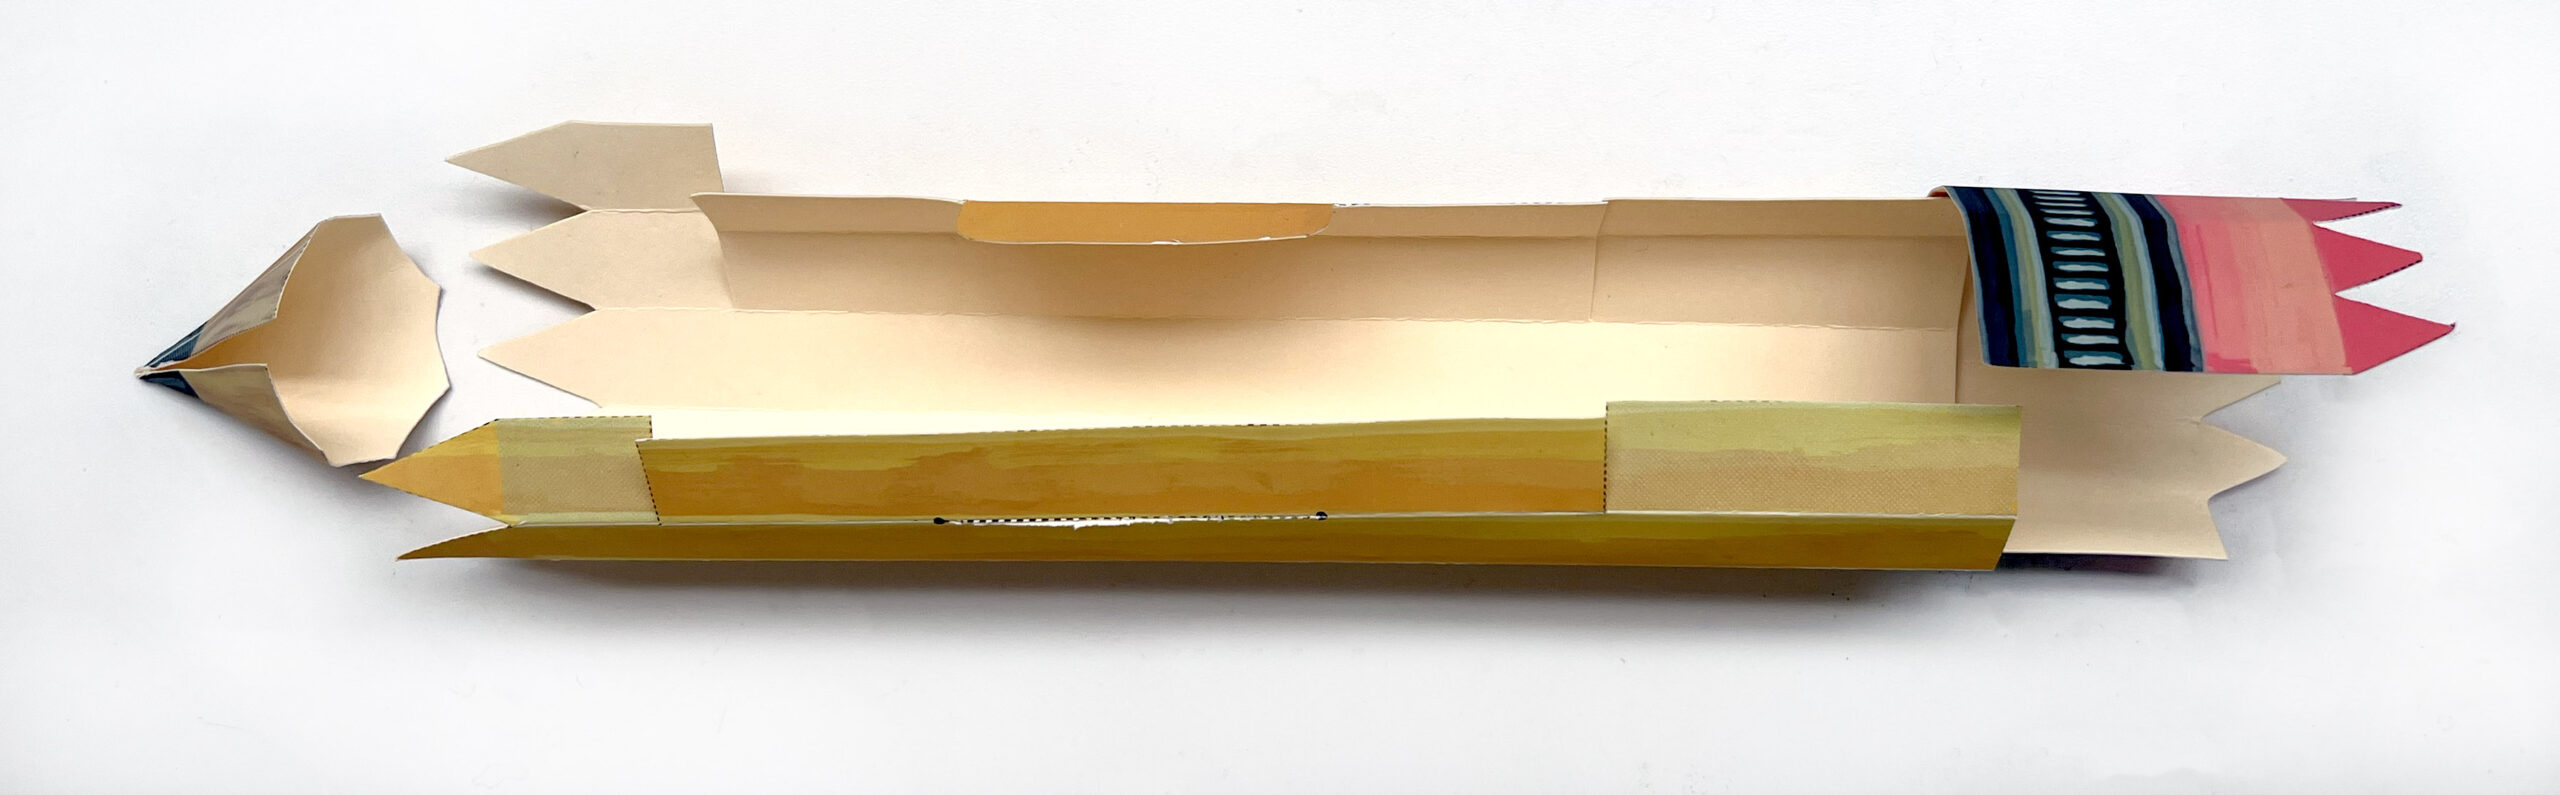 image of an unassembled paper pencil box ready to be glued